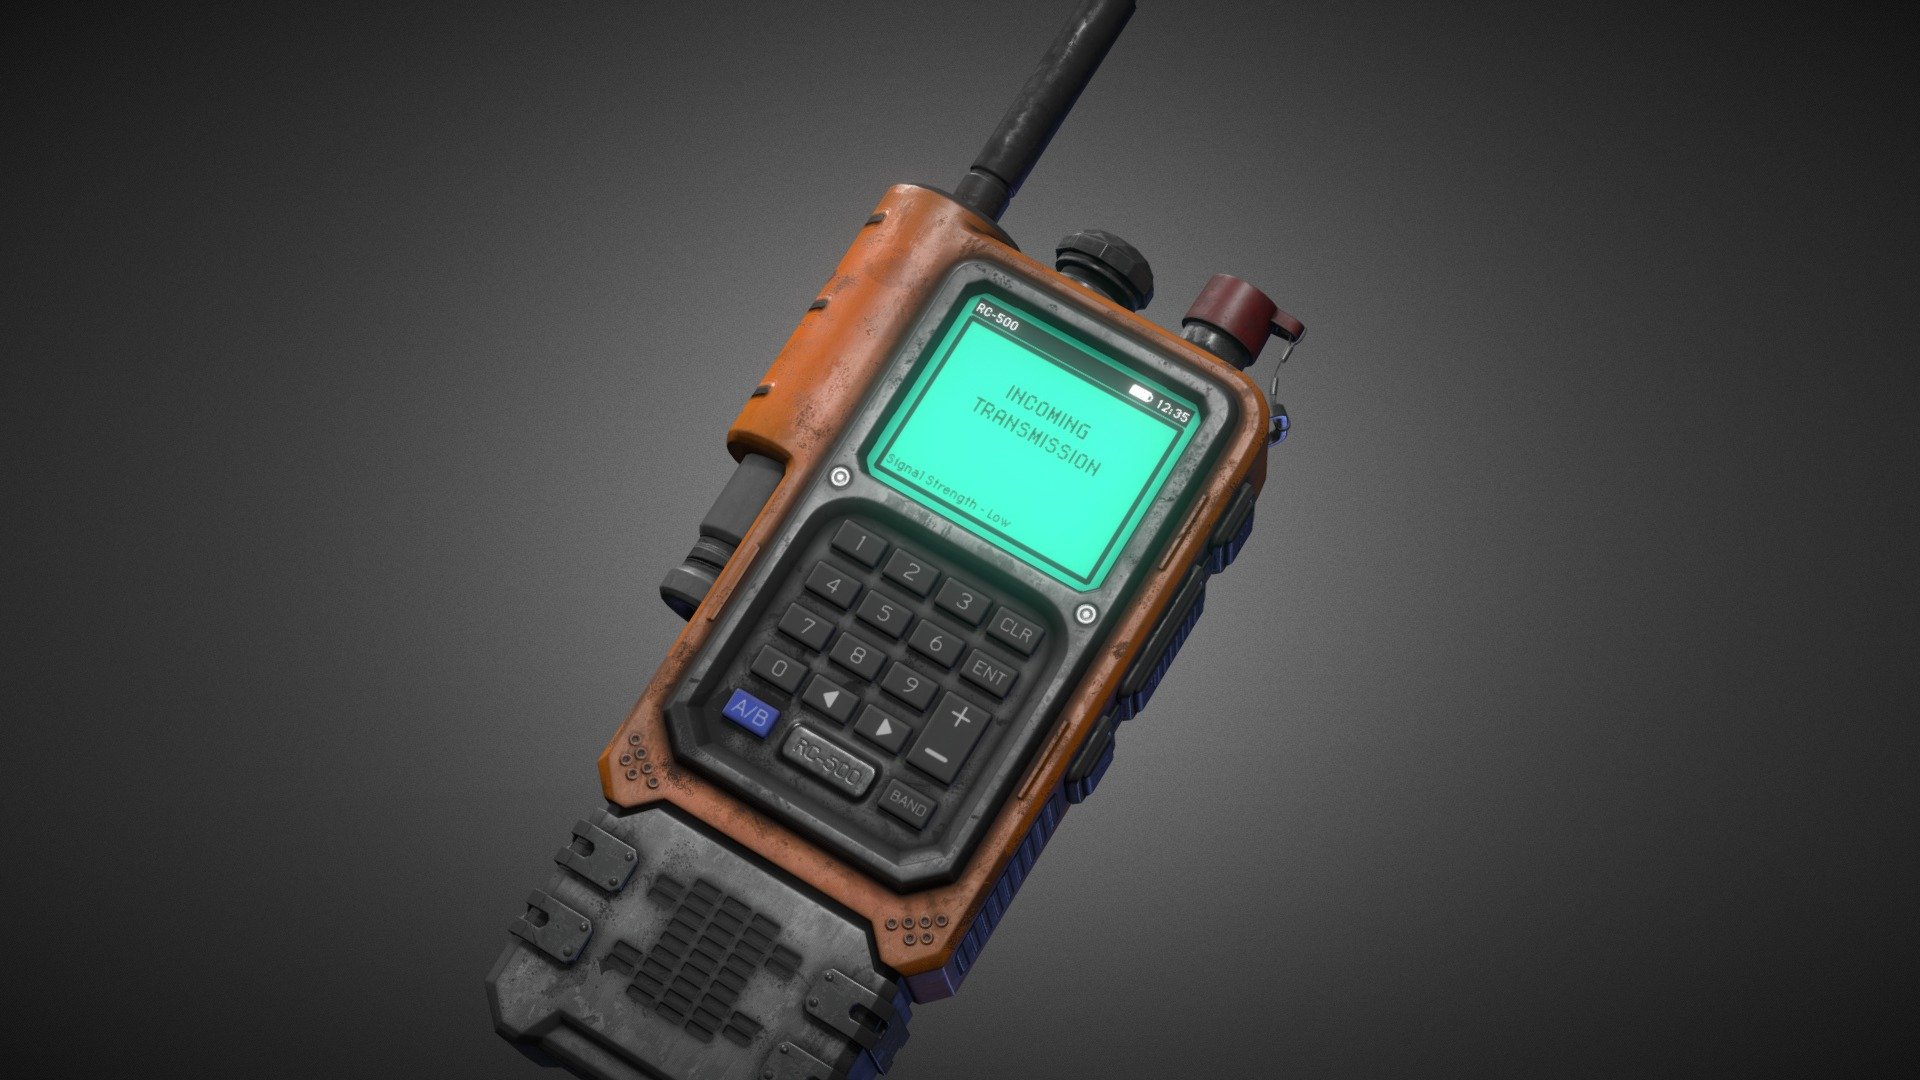 After learning so much from my Placement at Brain &amp; Nerd, I wanted to have a bit of fun and make a handheld radio. Always wanted to make one of these with my own twist to them. I have always loved the combination of modern and vintage tech, so with this one, I wanted to do the same. Mesh was made in Blender and textured within Substance Painter!

Artstation link - https://www.artstation.com/artwork/g8wOW8 - Handheld Radio - 3D model by Patrick Faulkner (@PatrickF) 3d model